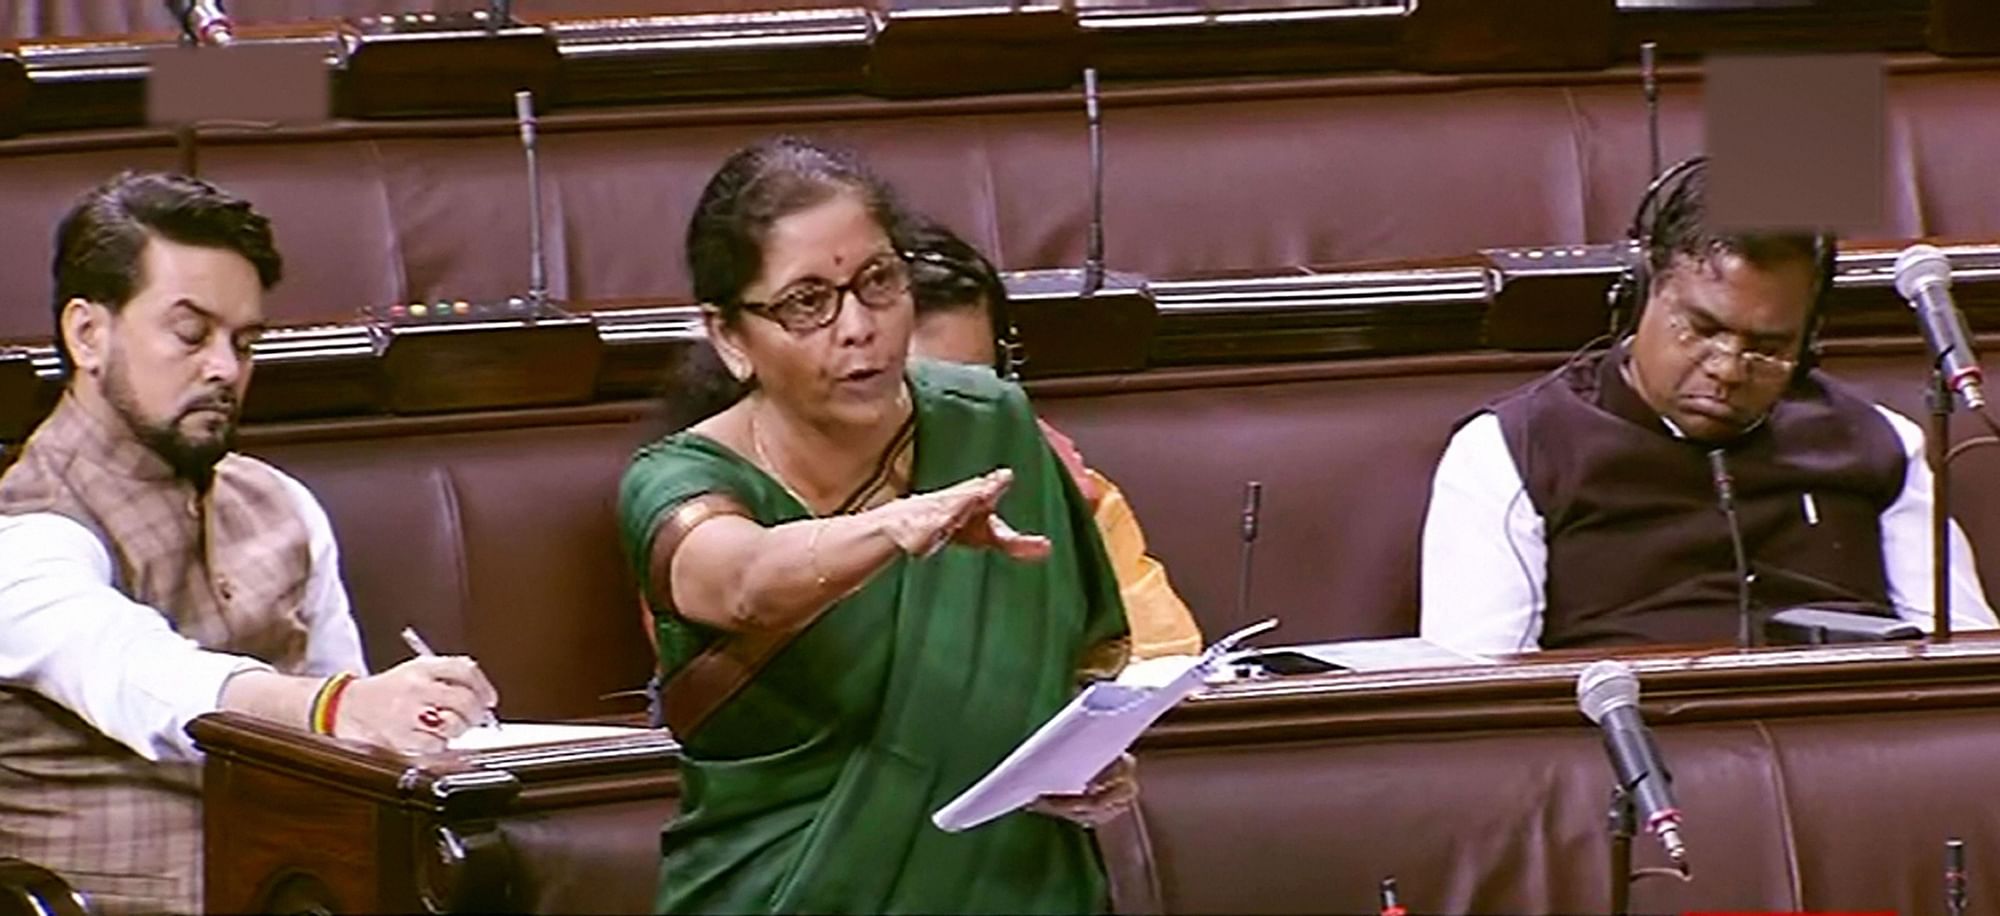 Union Finance Minister Nirmala Sitharaman speaks in the Rajya Sabha during Winter Session of Parliament on Wednesday.